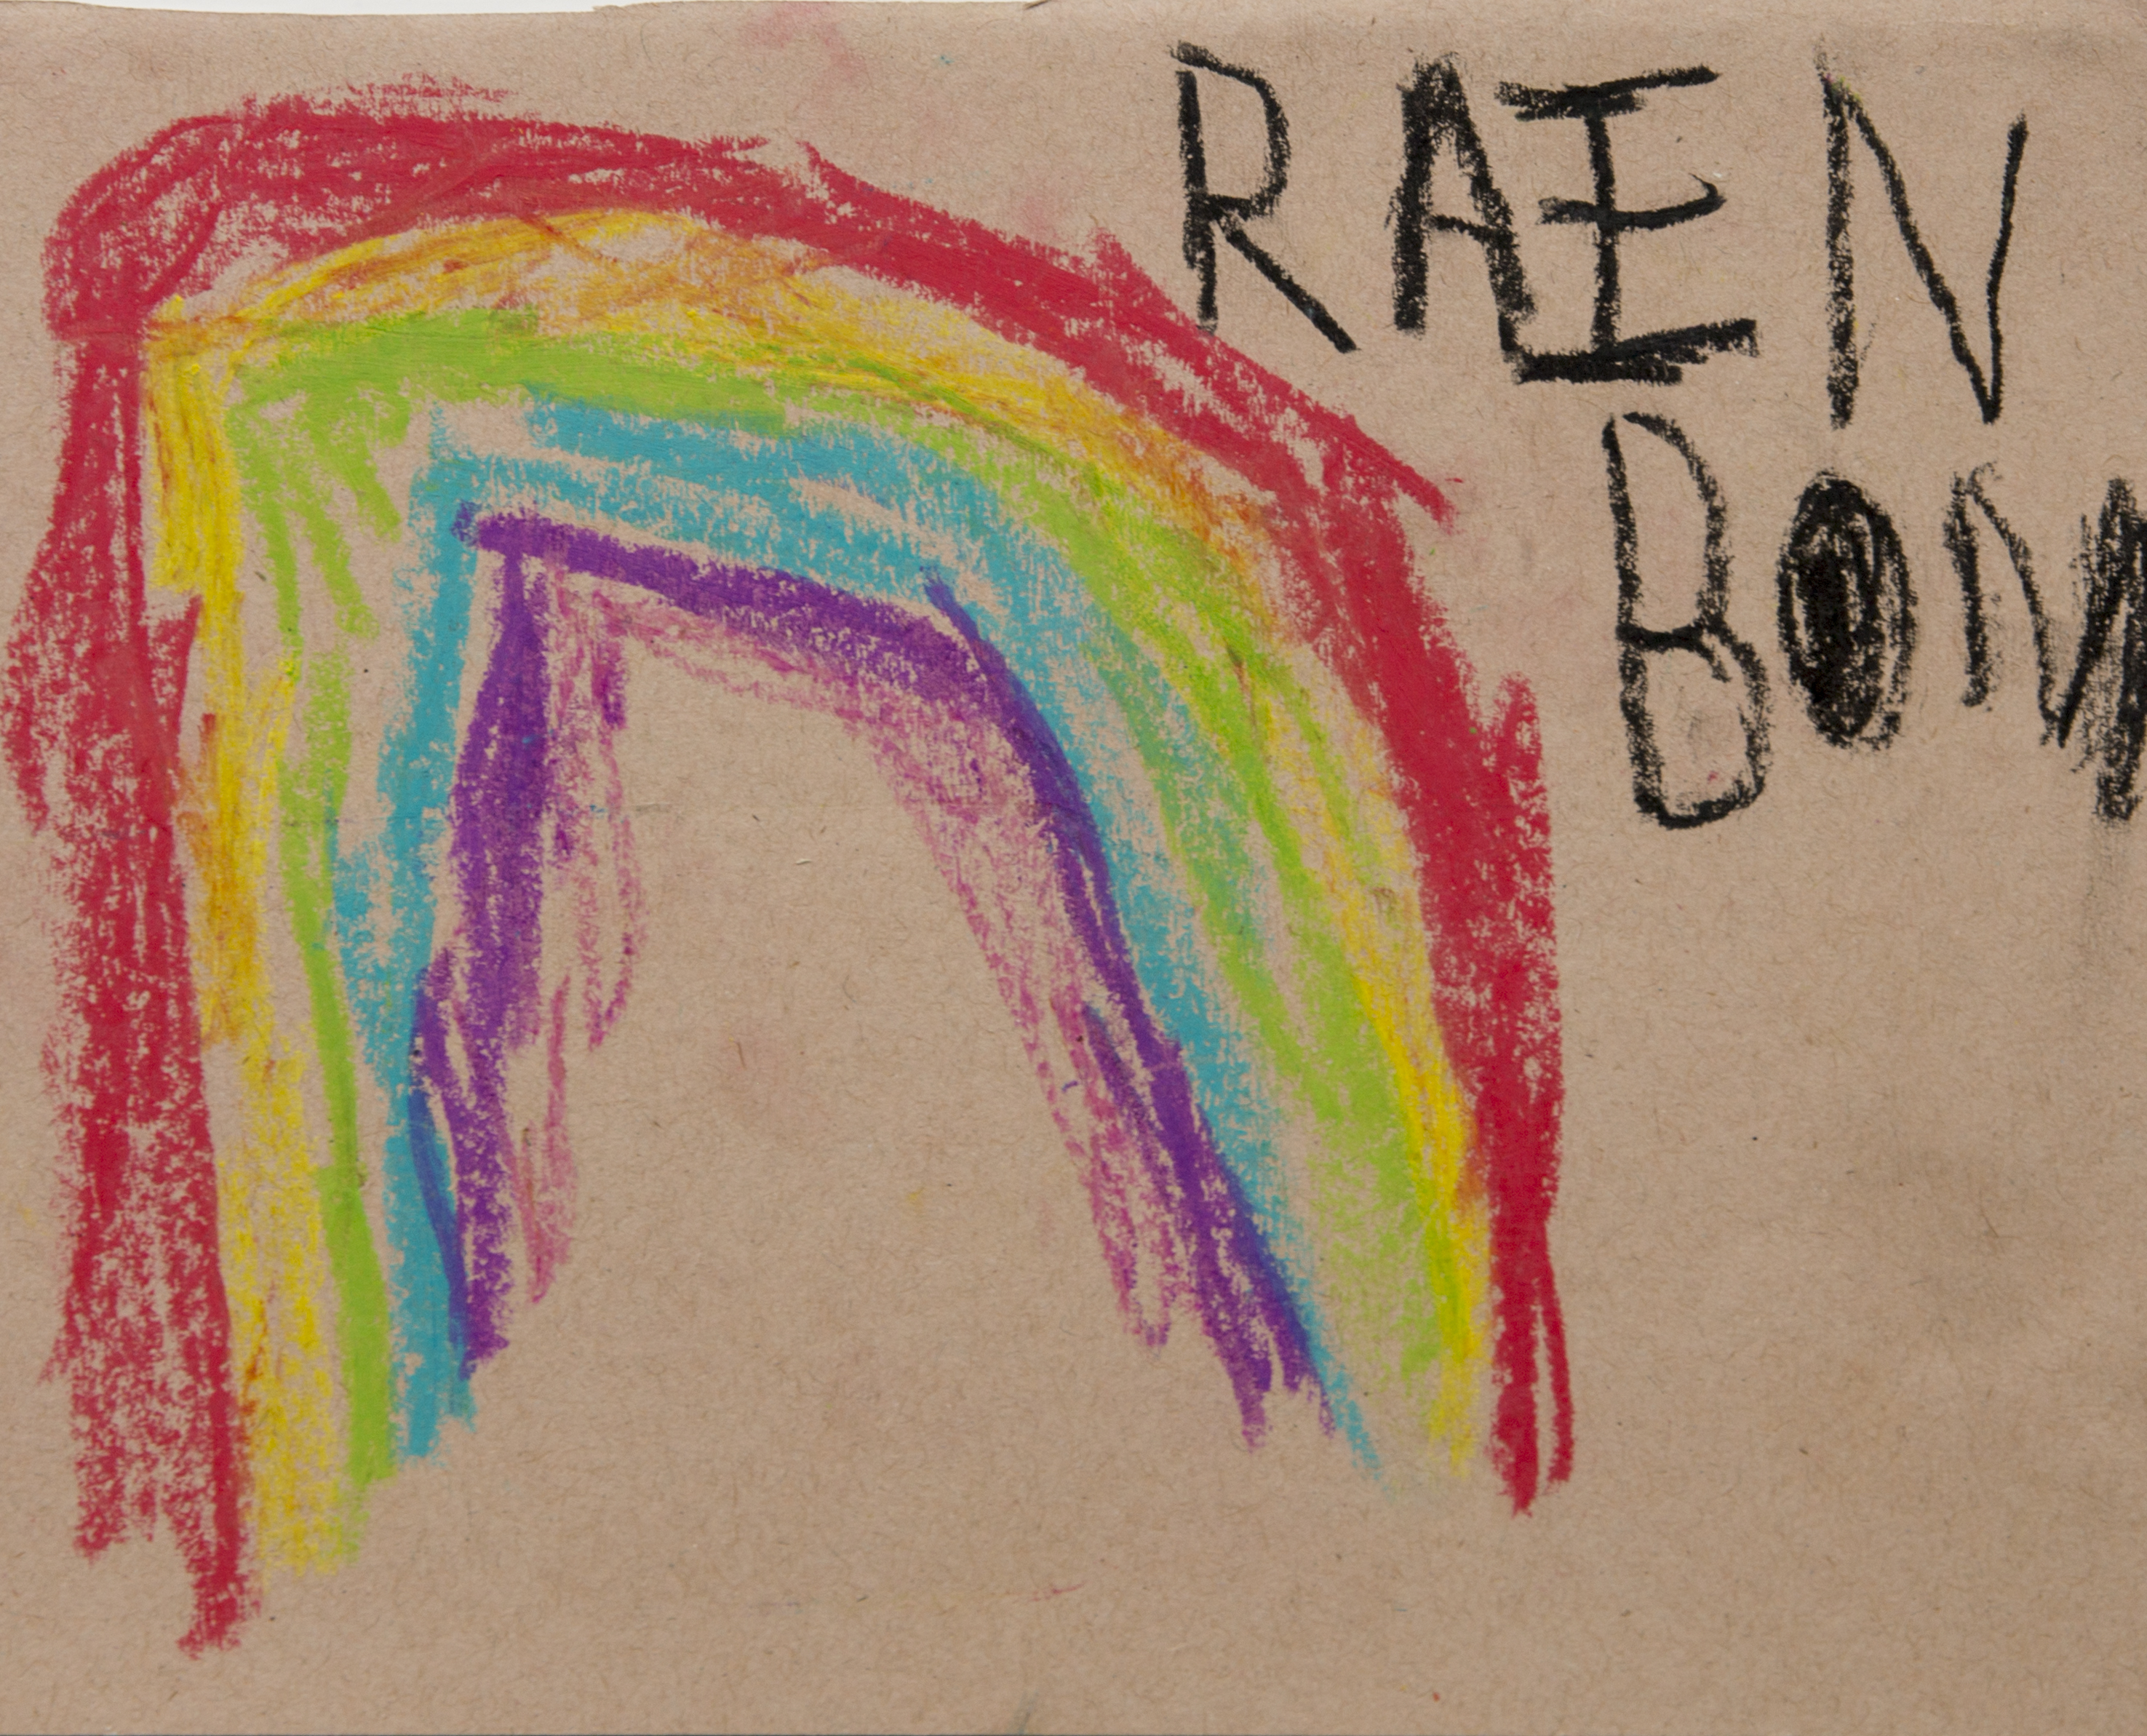 A children's drawing of a rainbow using crayons on brown paper . The rainbow uses red, yellow, green, blue and purple. The word rainbow is written in the top right corner in children's handwriting, using black crayon.